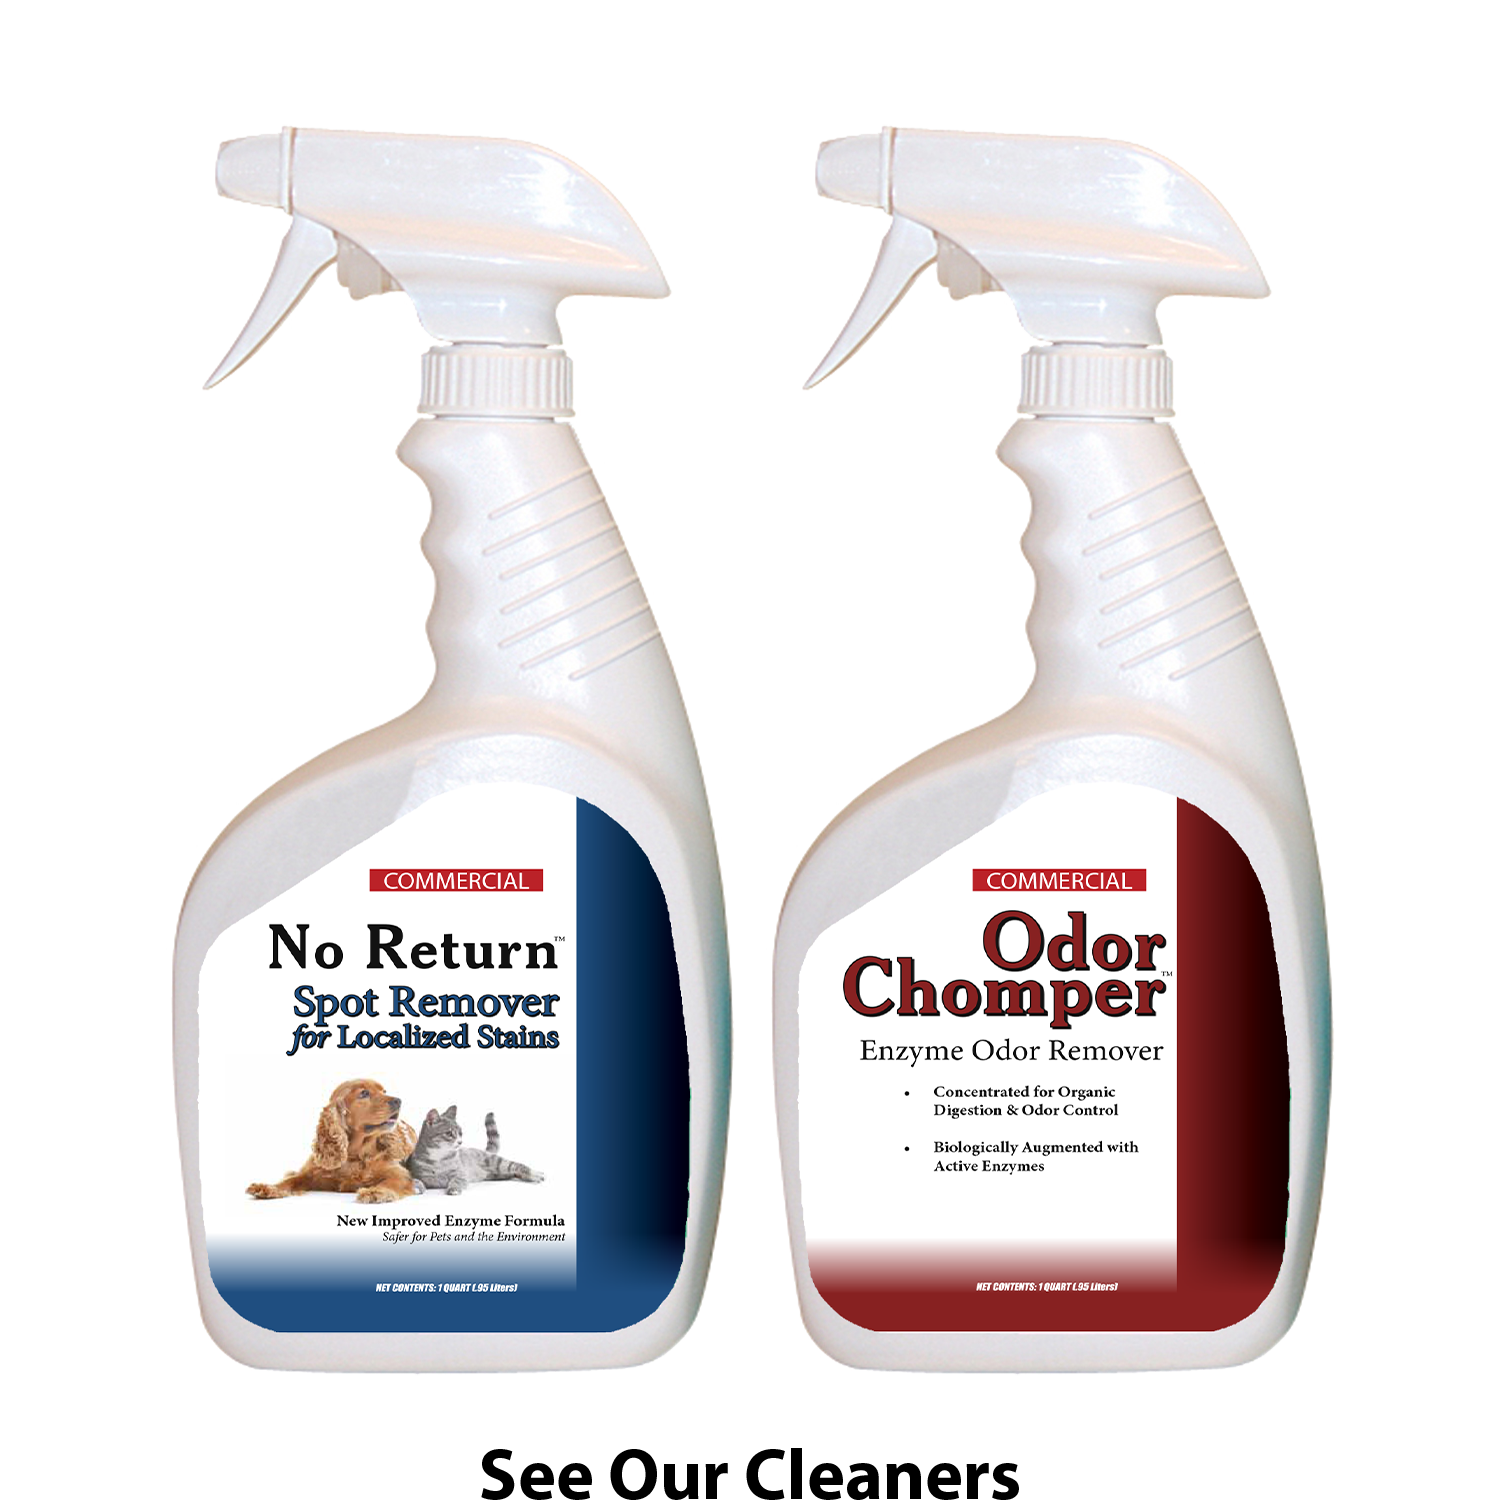 Check Out Our Selection of Cleaners!